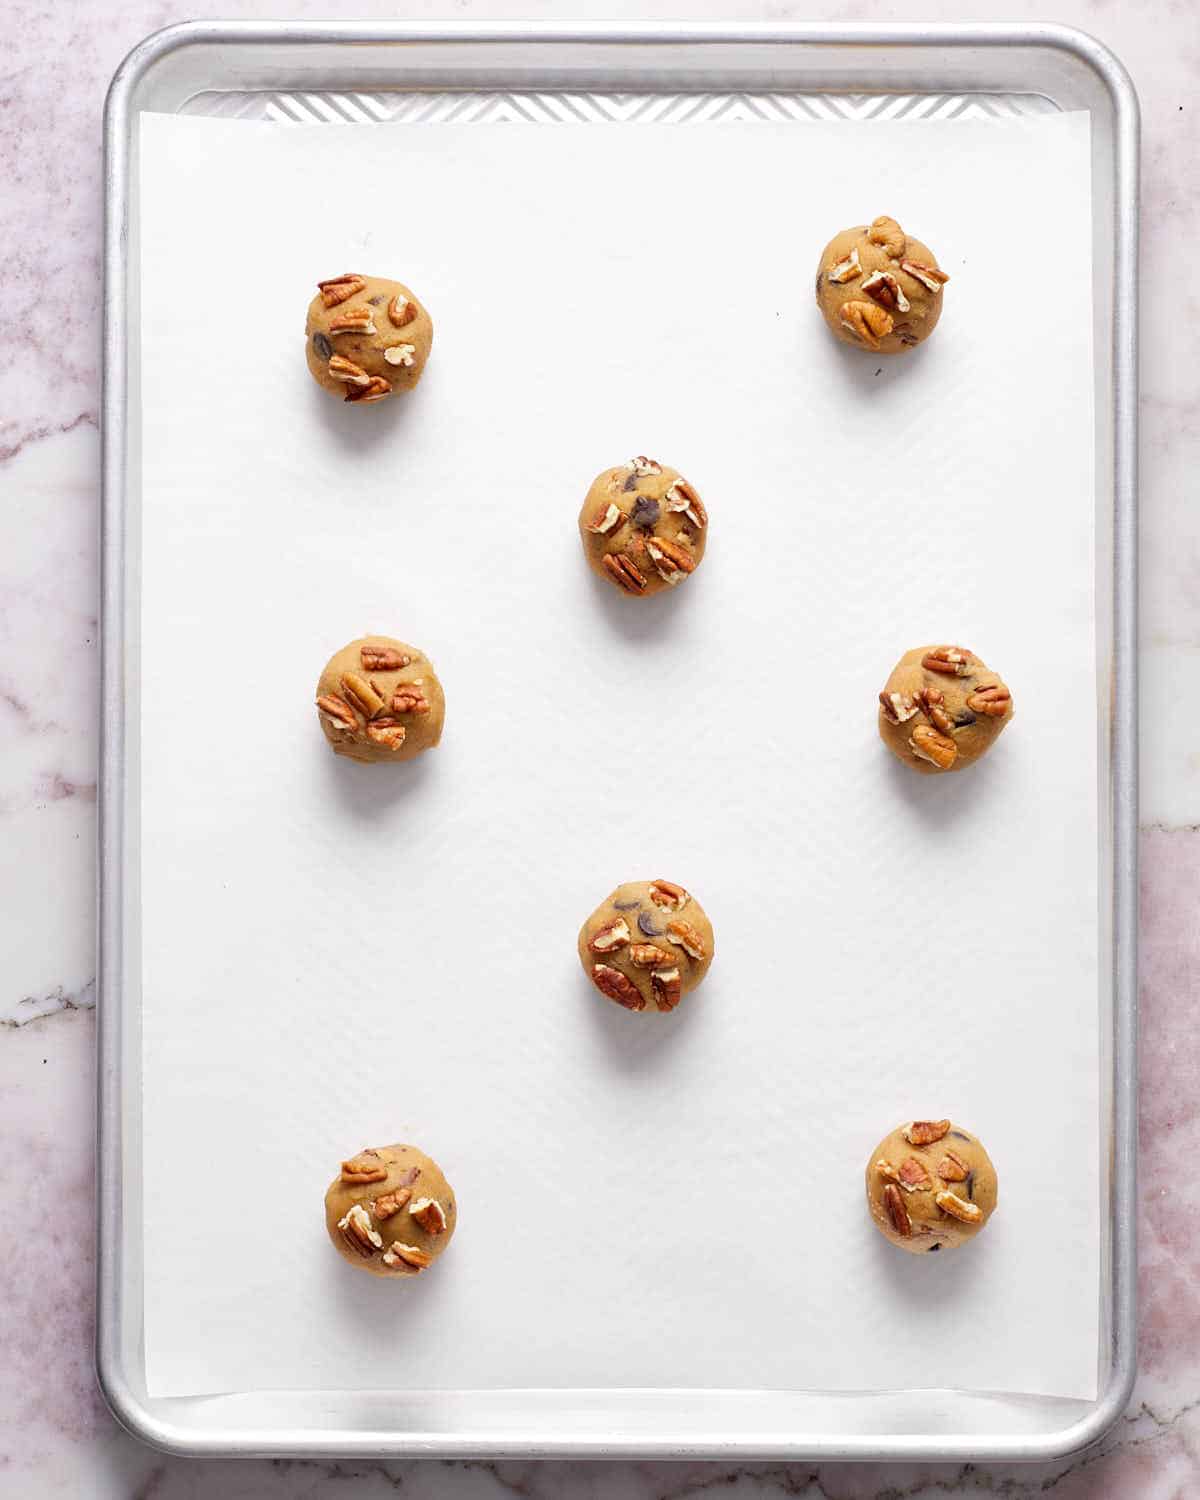 Cookie dough rolled into balls and arranged on a parchment paper lined baking sheet.